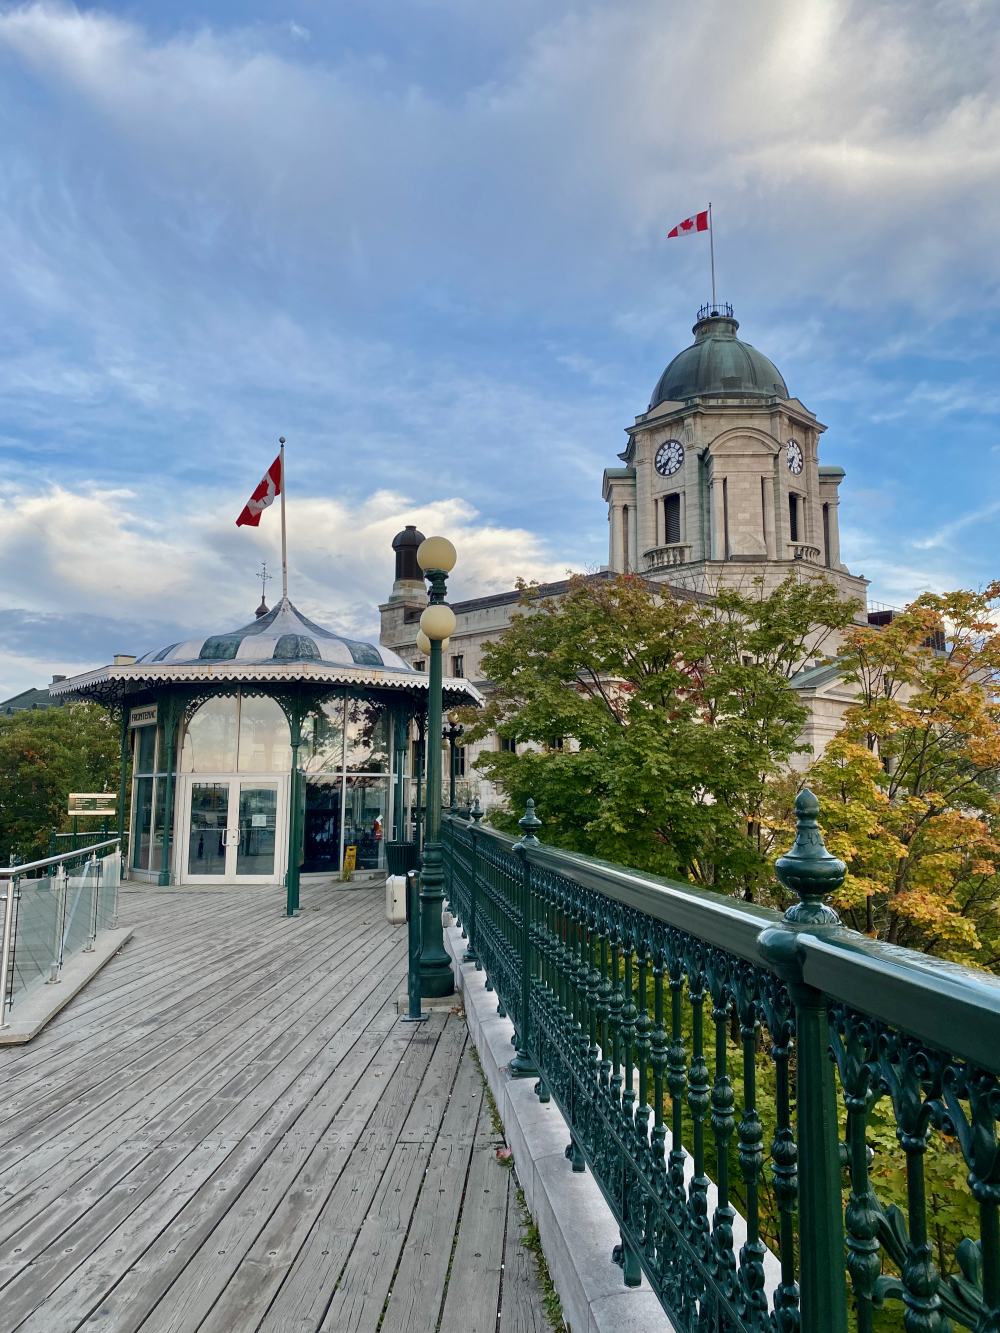 Dufferin Terrace, a wide, wooden boardwalk wrapping around the front of the Château Frontenac